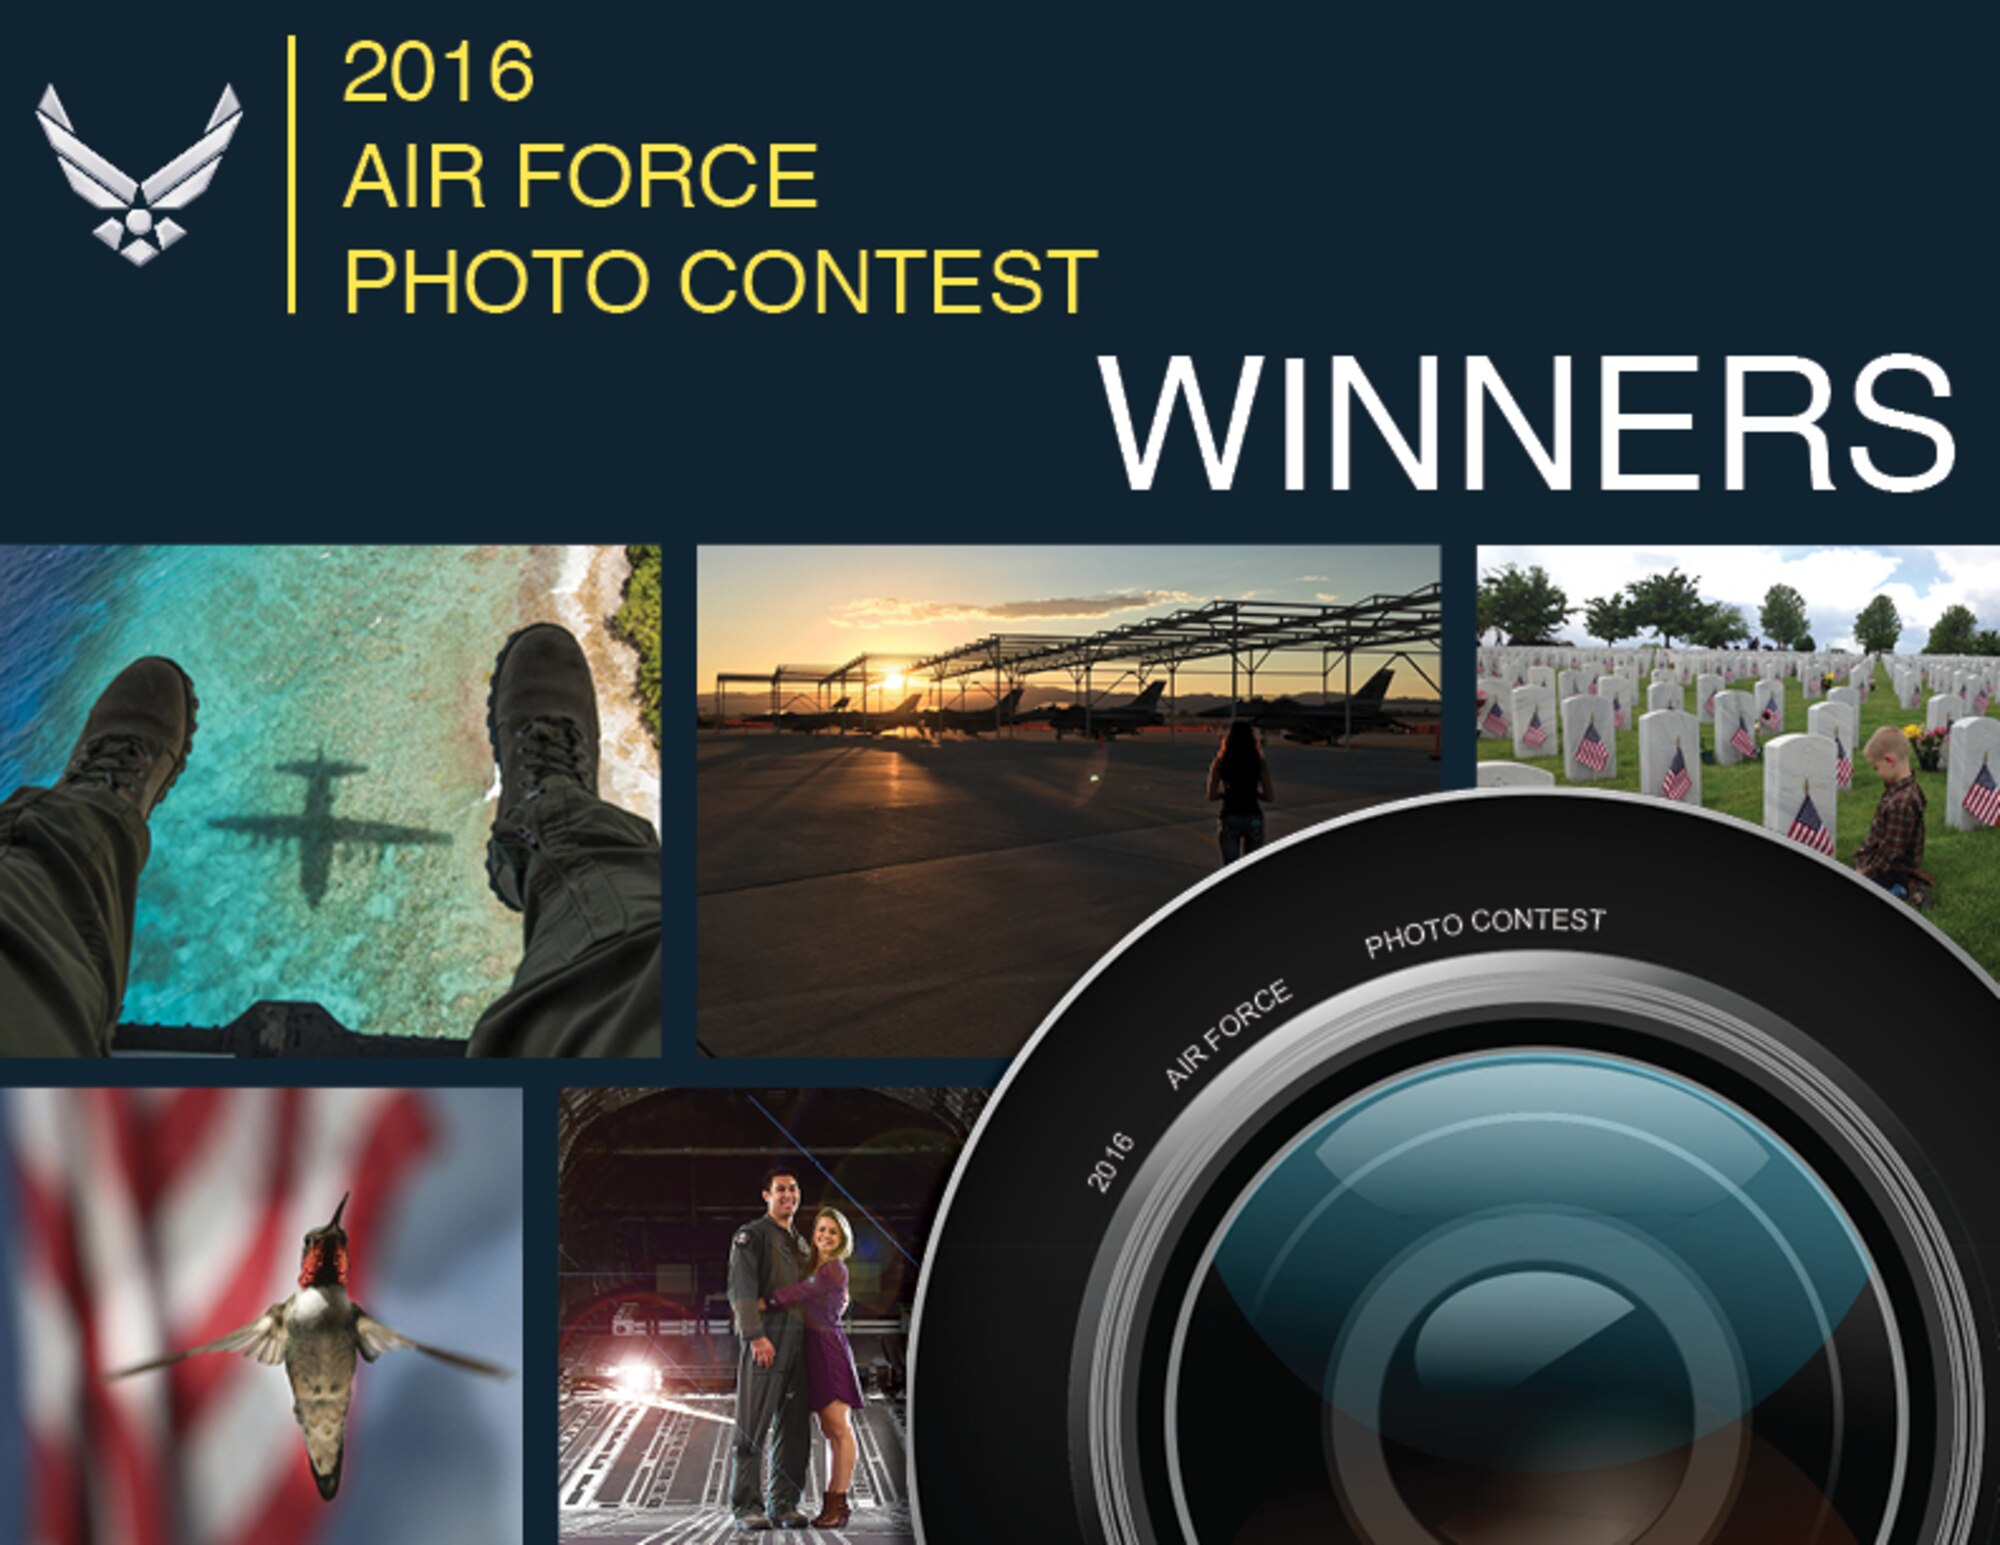 2016 Air Force Photo Contest winners announced